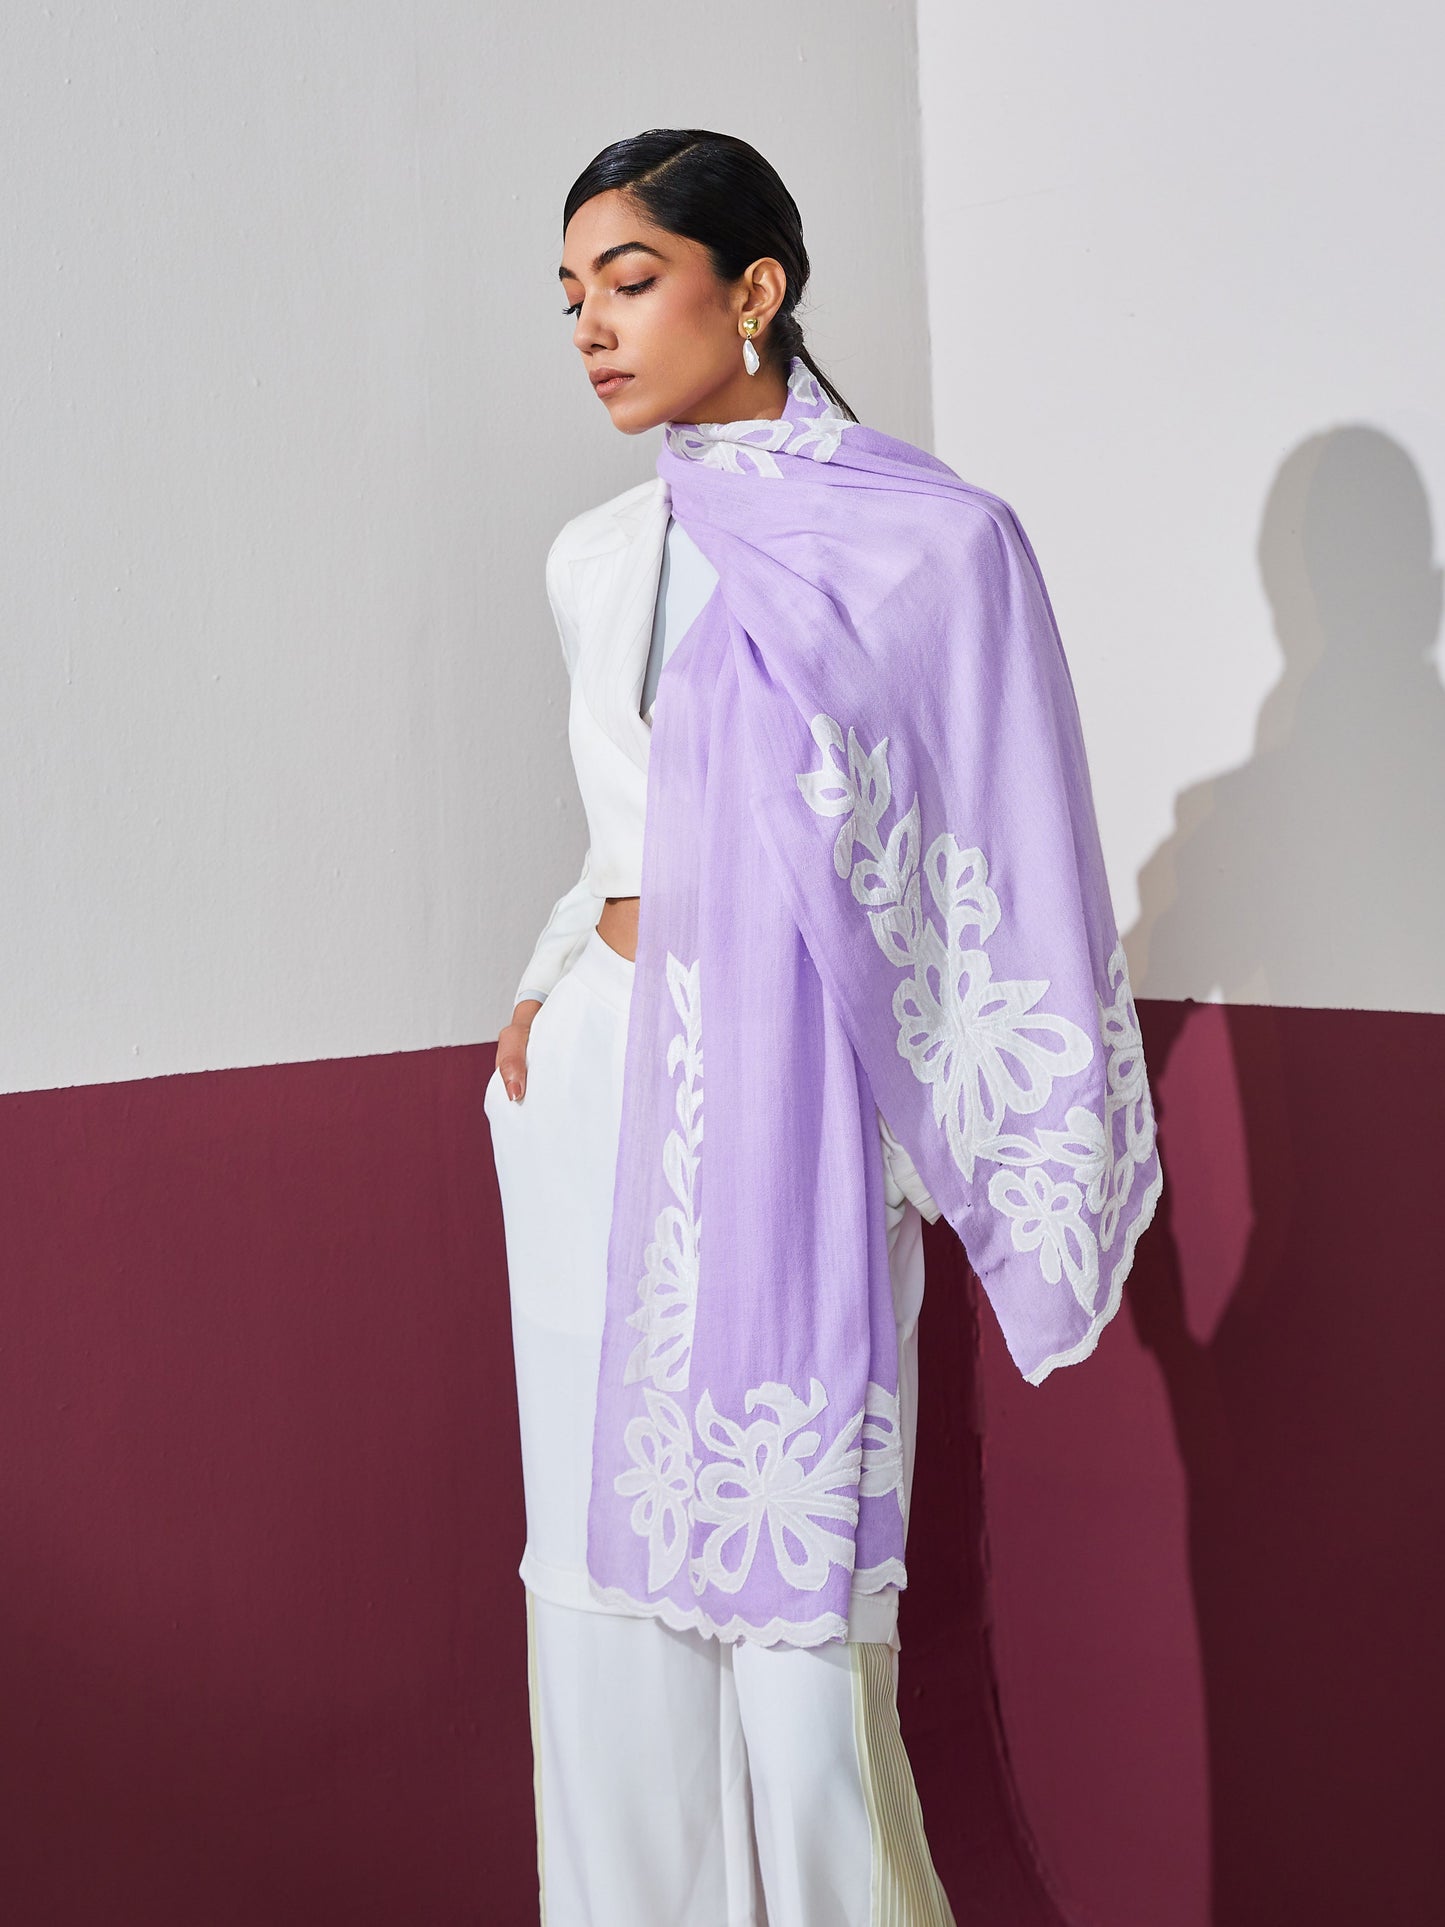 Model is wearing a lavender Velvet affair cashmere stole with white applique from Shaza.